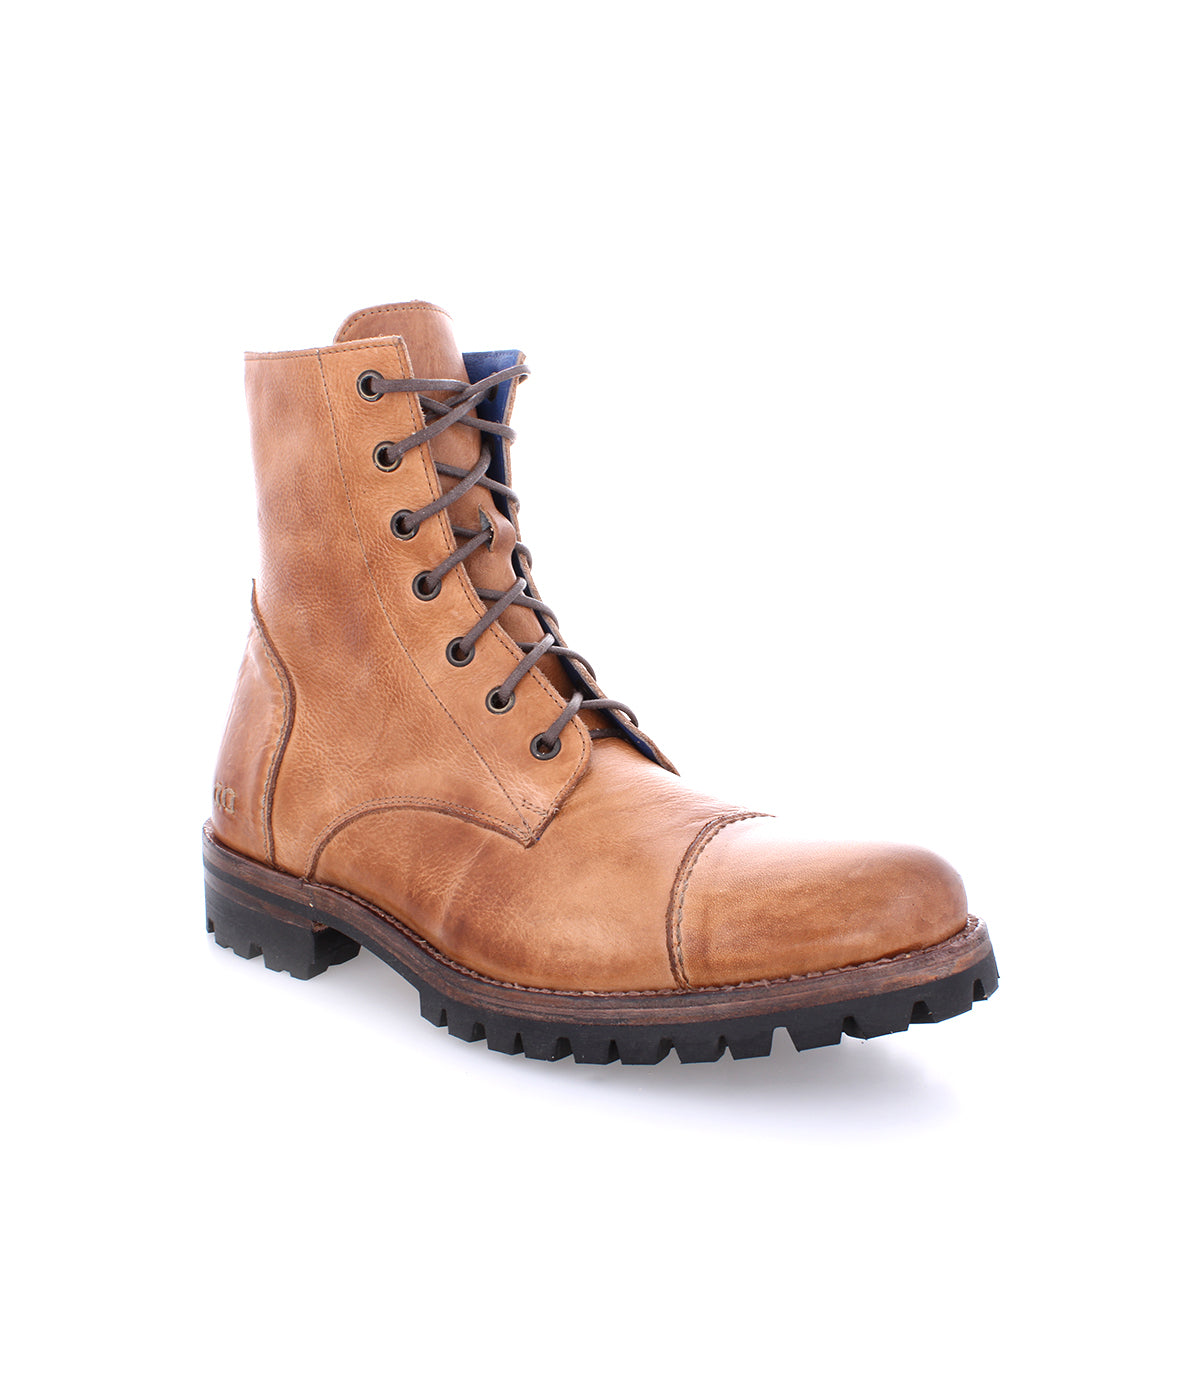 A single brown leather lace-up combat style boot with a rugged sole, isolated on a white background. This is the Bed Stu Protege Trek.